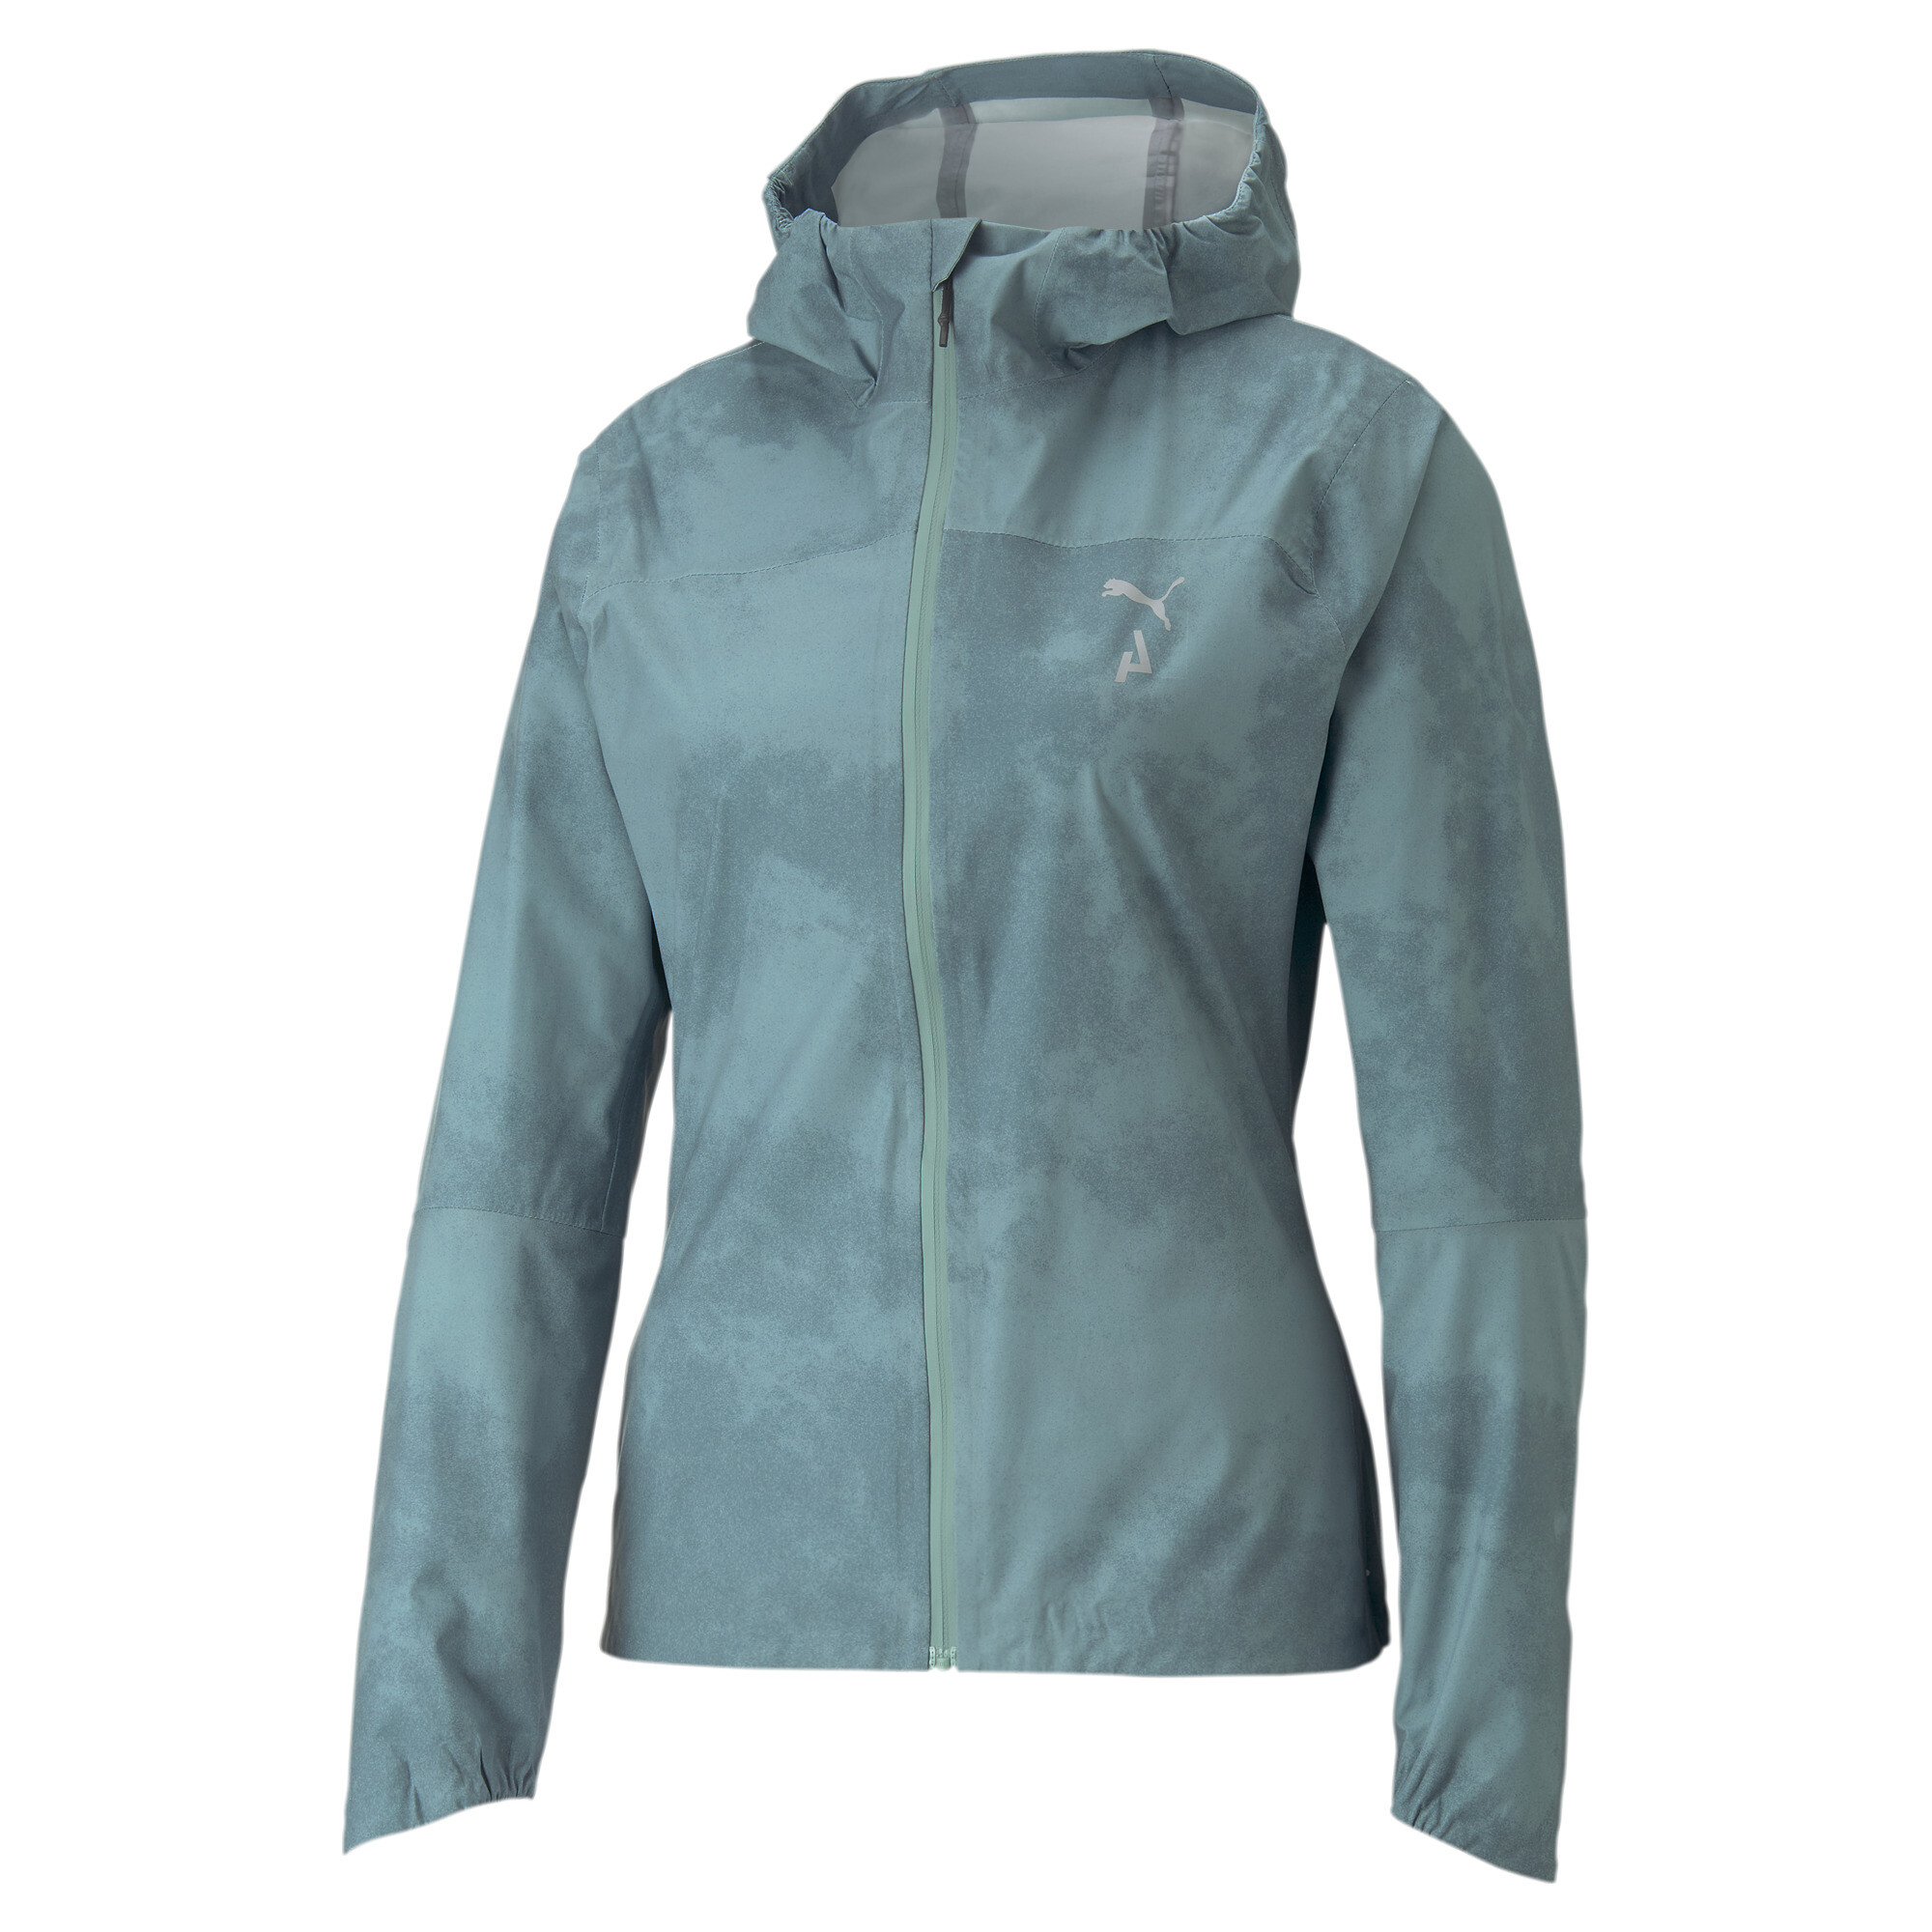 Women's Puma SEASONS Storm CELL Sympa TexÂ® Packable Trail Running Jacket, Gray, Size XL, Clothing